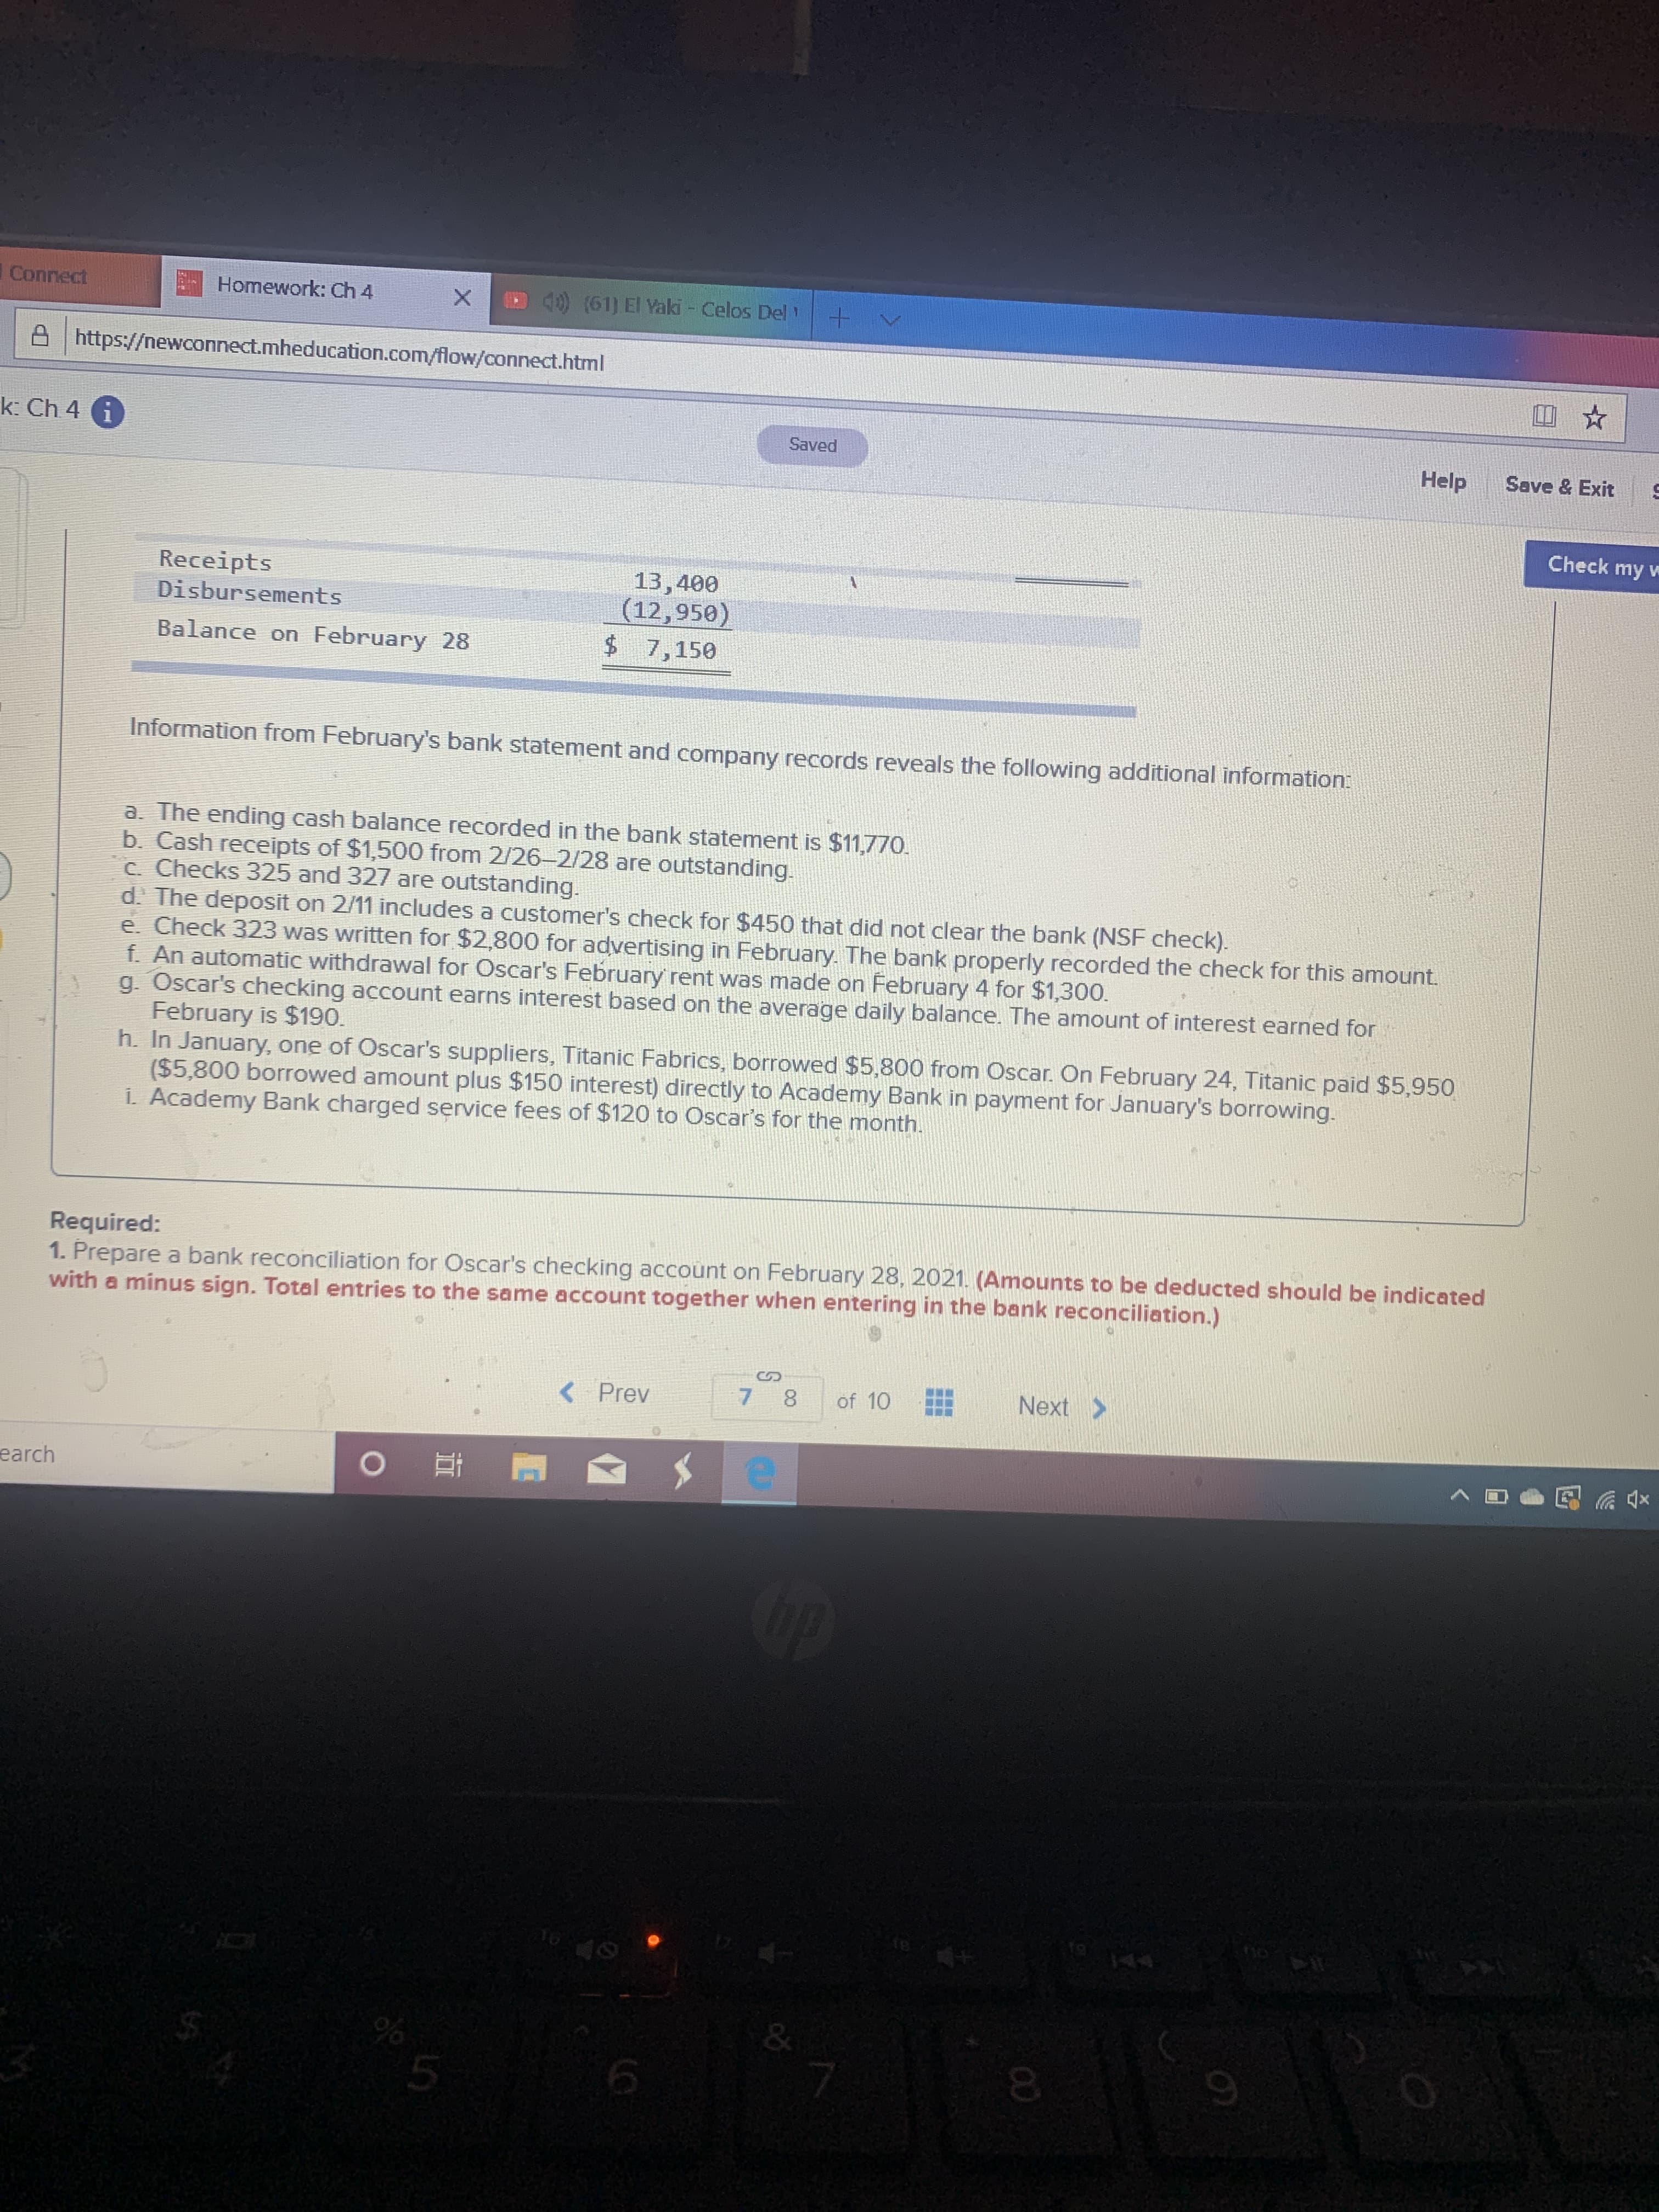 Connect
Homework: Ch 4
4) (61) El Yaki - Celos Del
A https://newconnect.mheducation.com/flow/connect.html
k: Ch 4 i
Saved
Help
Save & Exit
Check my w
Receipts
Disbursements
13,400
(12,950)
$ 7,150
Balance on February 28
Information from February's bank statement and company records reveals the following additional information:
a. The ending cash balance recorded in the bank statement is $11,770.
b. Cash receipts of $1,500 from 2/26-2/28 are outstanding.
c. Checks 325 and 327 are outstanding.
d. The depoosit on 2/11 includes a customer's check for $450 that did not clear the bank (NSF check).
e. Check 323 was written for $2,800 for advertising in February. The bank properly recorded the check for this amount.
f. An automatic withdrawal for Oscar's February rent was made on February 4 for $1,300.
g. Oscar's checking account earns interest based on the average daily balance. The amount of interest earned for
February is $190.
h. In January, one of Oscar's suppliers, Titanic Fabrics, borrowed $5,800 from Oscar. On February 24, Titanic paid $5,950
($5,800 borrowed amount plus $150 interest) directly to Academy Bank in payment for January's borrowing.
i. Academy Bank charged service fees of $120 to Oscar's for the month.
Required:
1. Prepare a bank reconciliation for Oscar's checking account on February 28, 2021. (Amounts to be deducted should be indicated
with a minus sign. Total entries to the same account together when entering in the bank reconciliation.)
< Prev
of 10
Next >
earch
op
&
00
